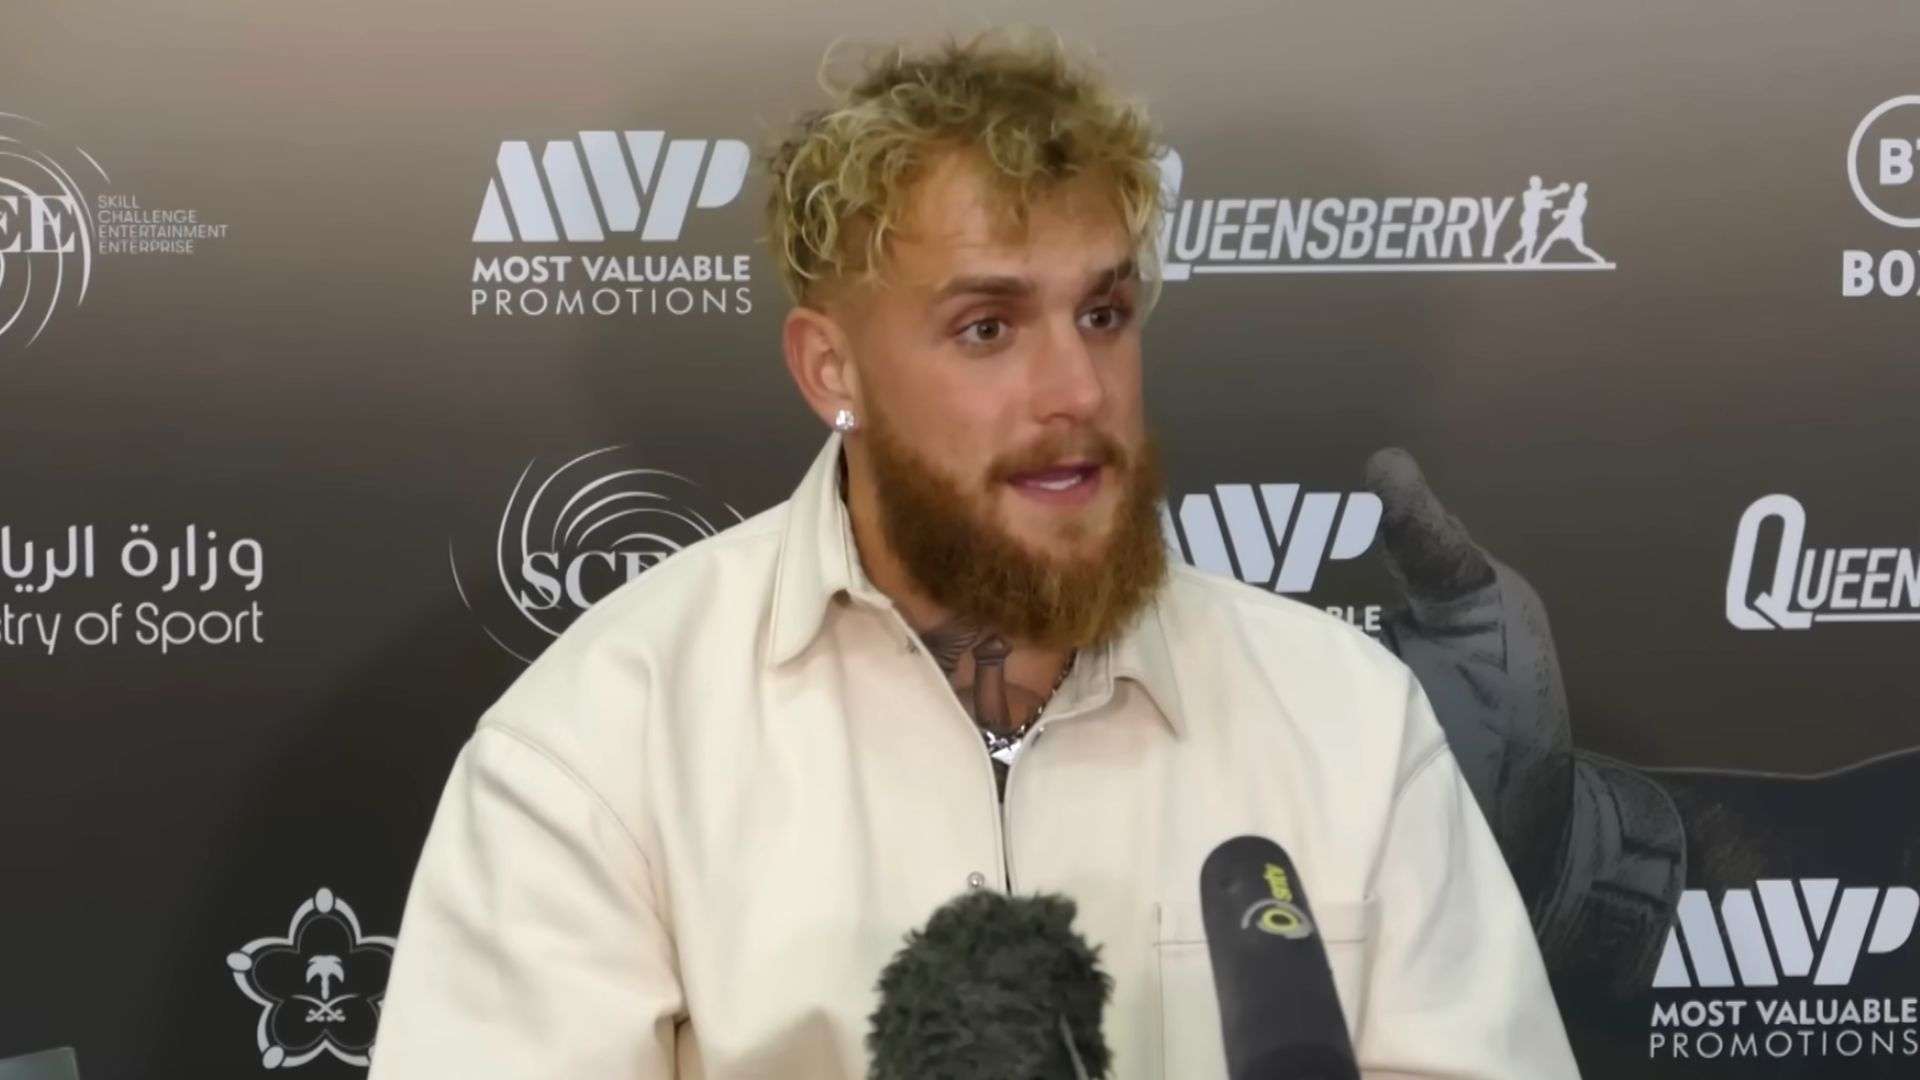 jake Paul in white shirt holding press conference